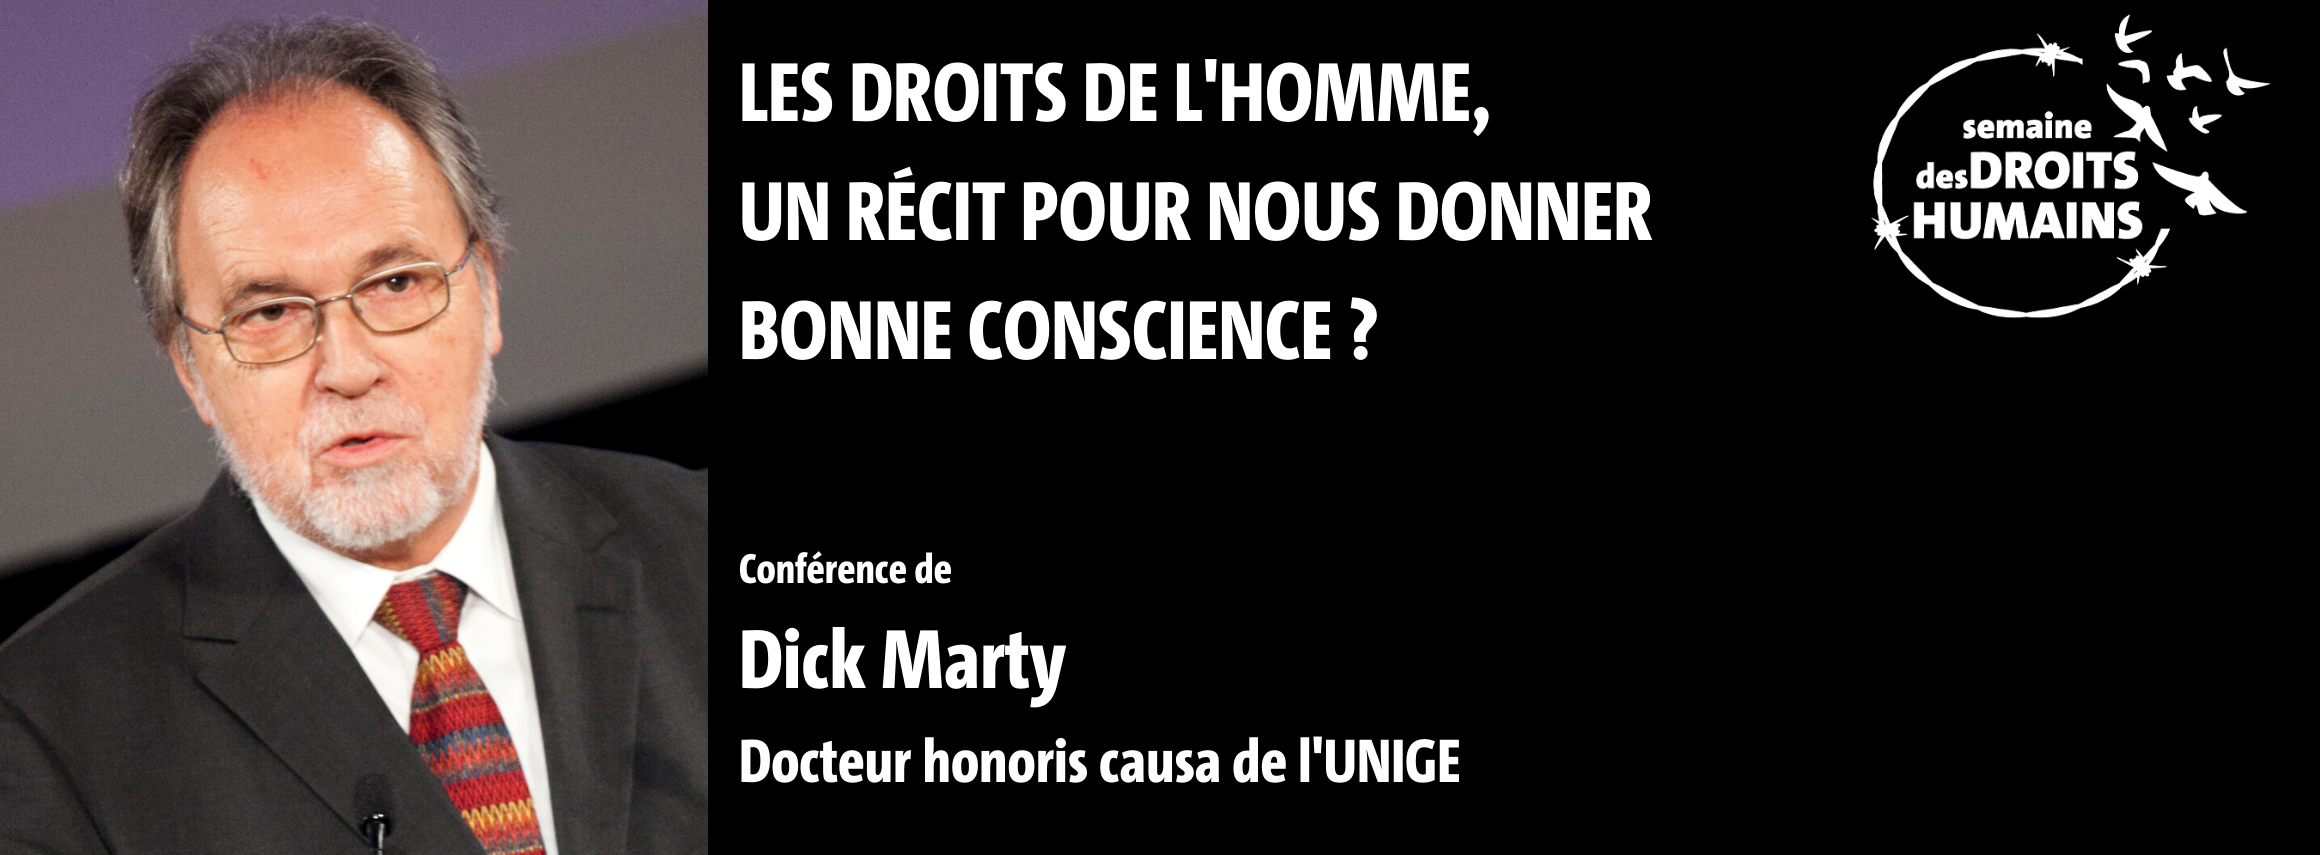 Dick Marty_Tuile5colonnes.png